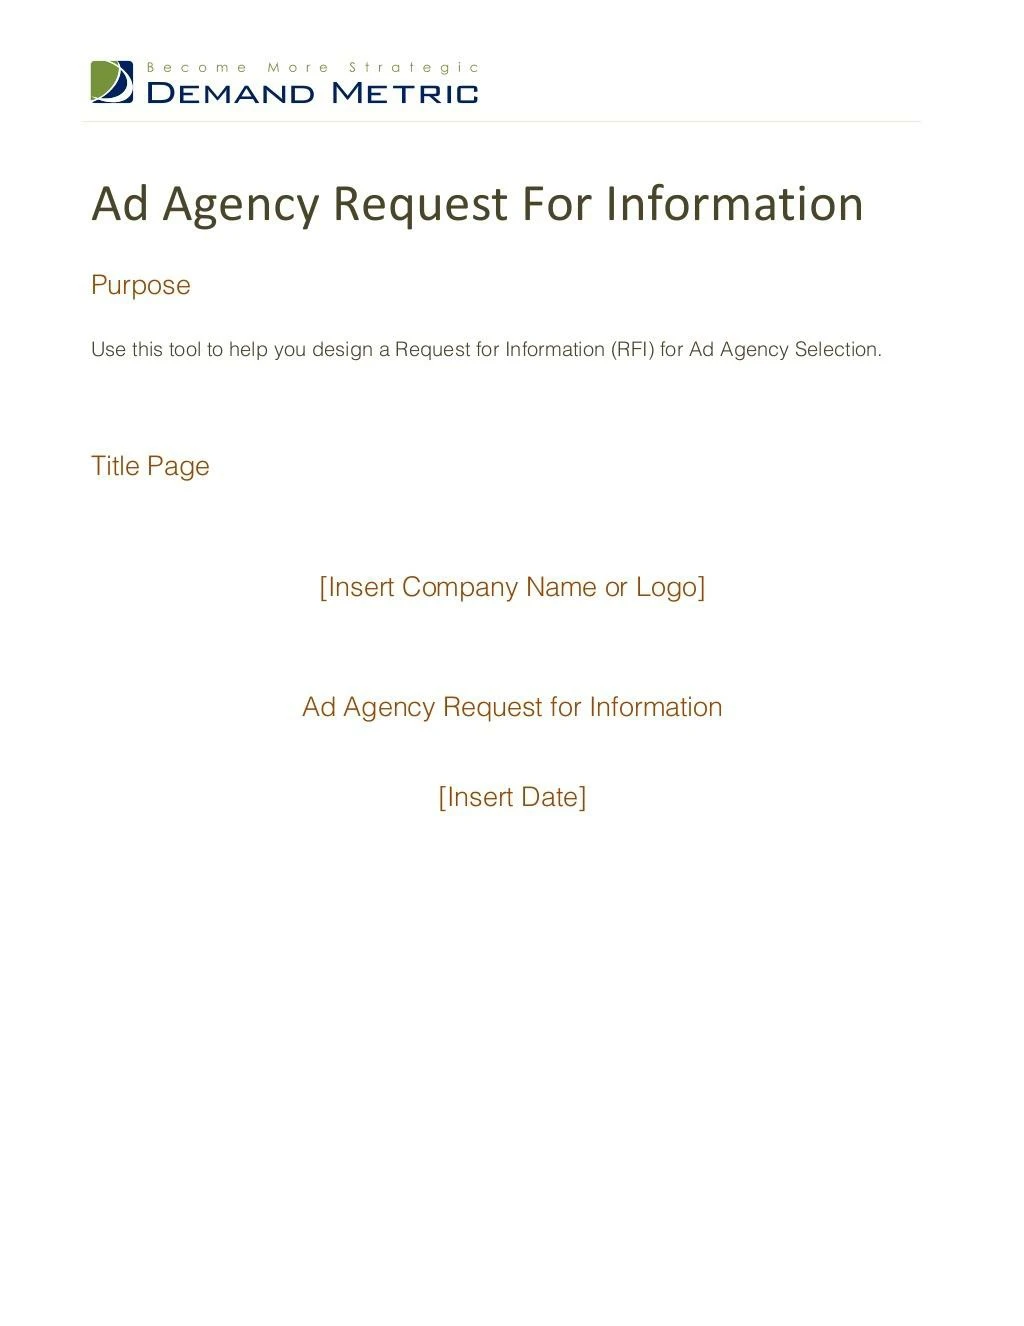 ad agency request for information